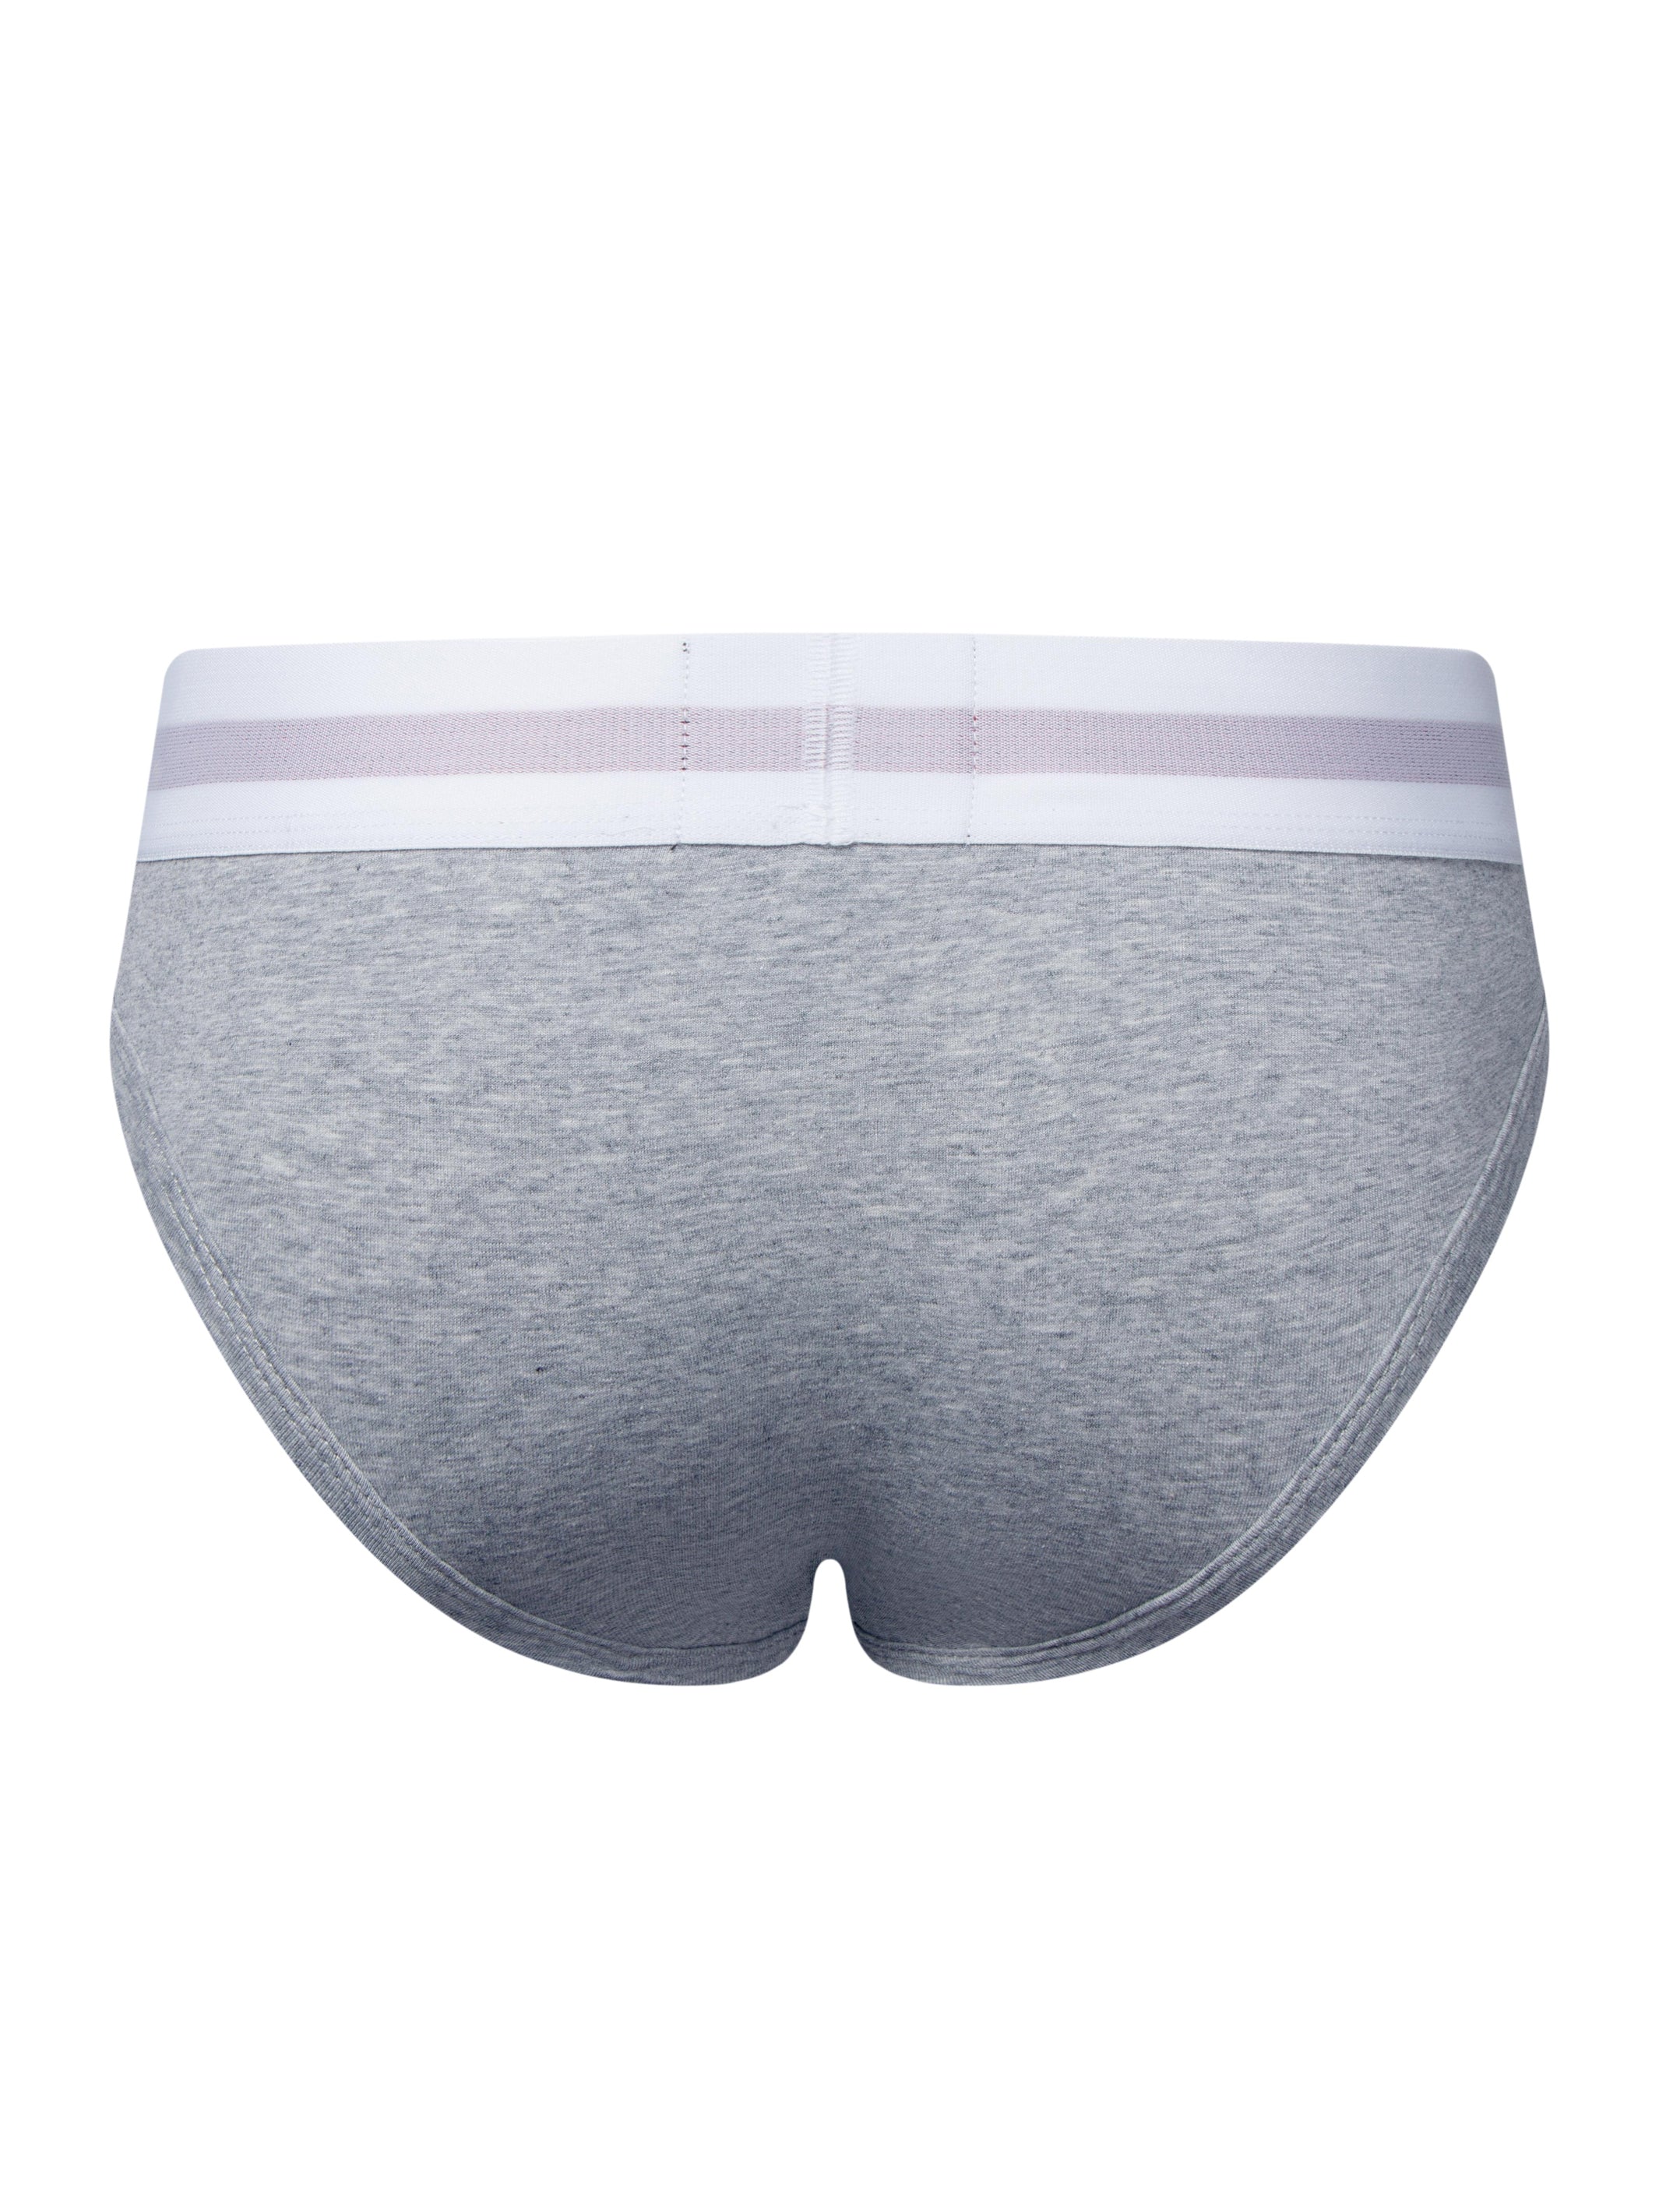 A pair of Insignia Brief's in Grey by Twisted Beast from the back.